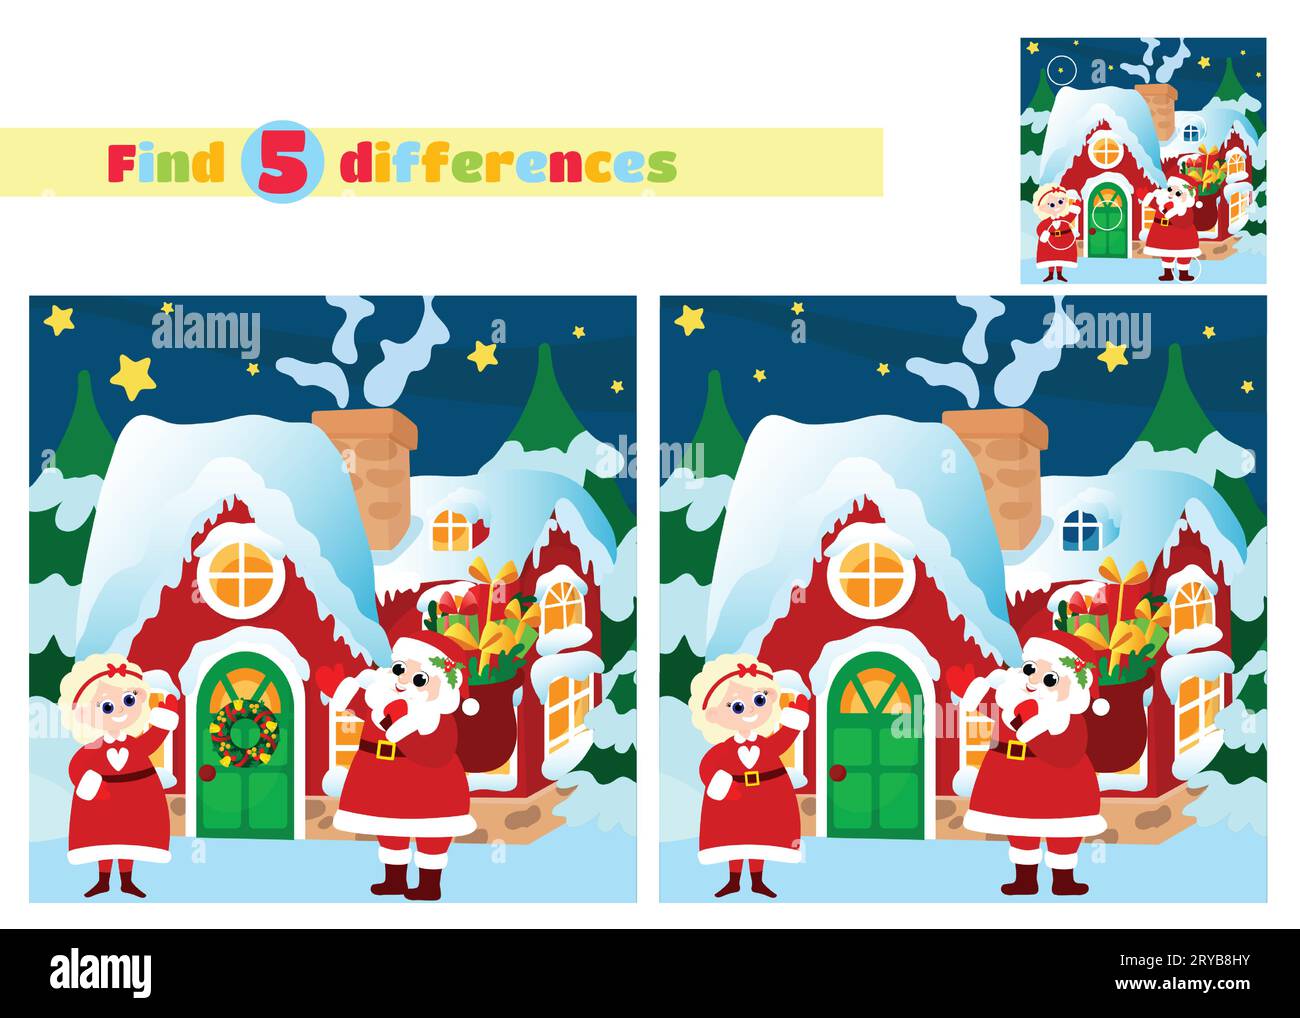 Find the differences. Evening scene in front of Santa Claus' house. Santa and Mrs. Santa stand in front of the door and invite you inside. Stock Vector